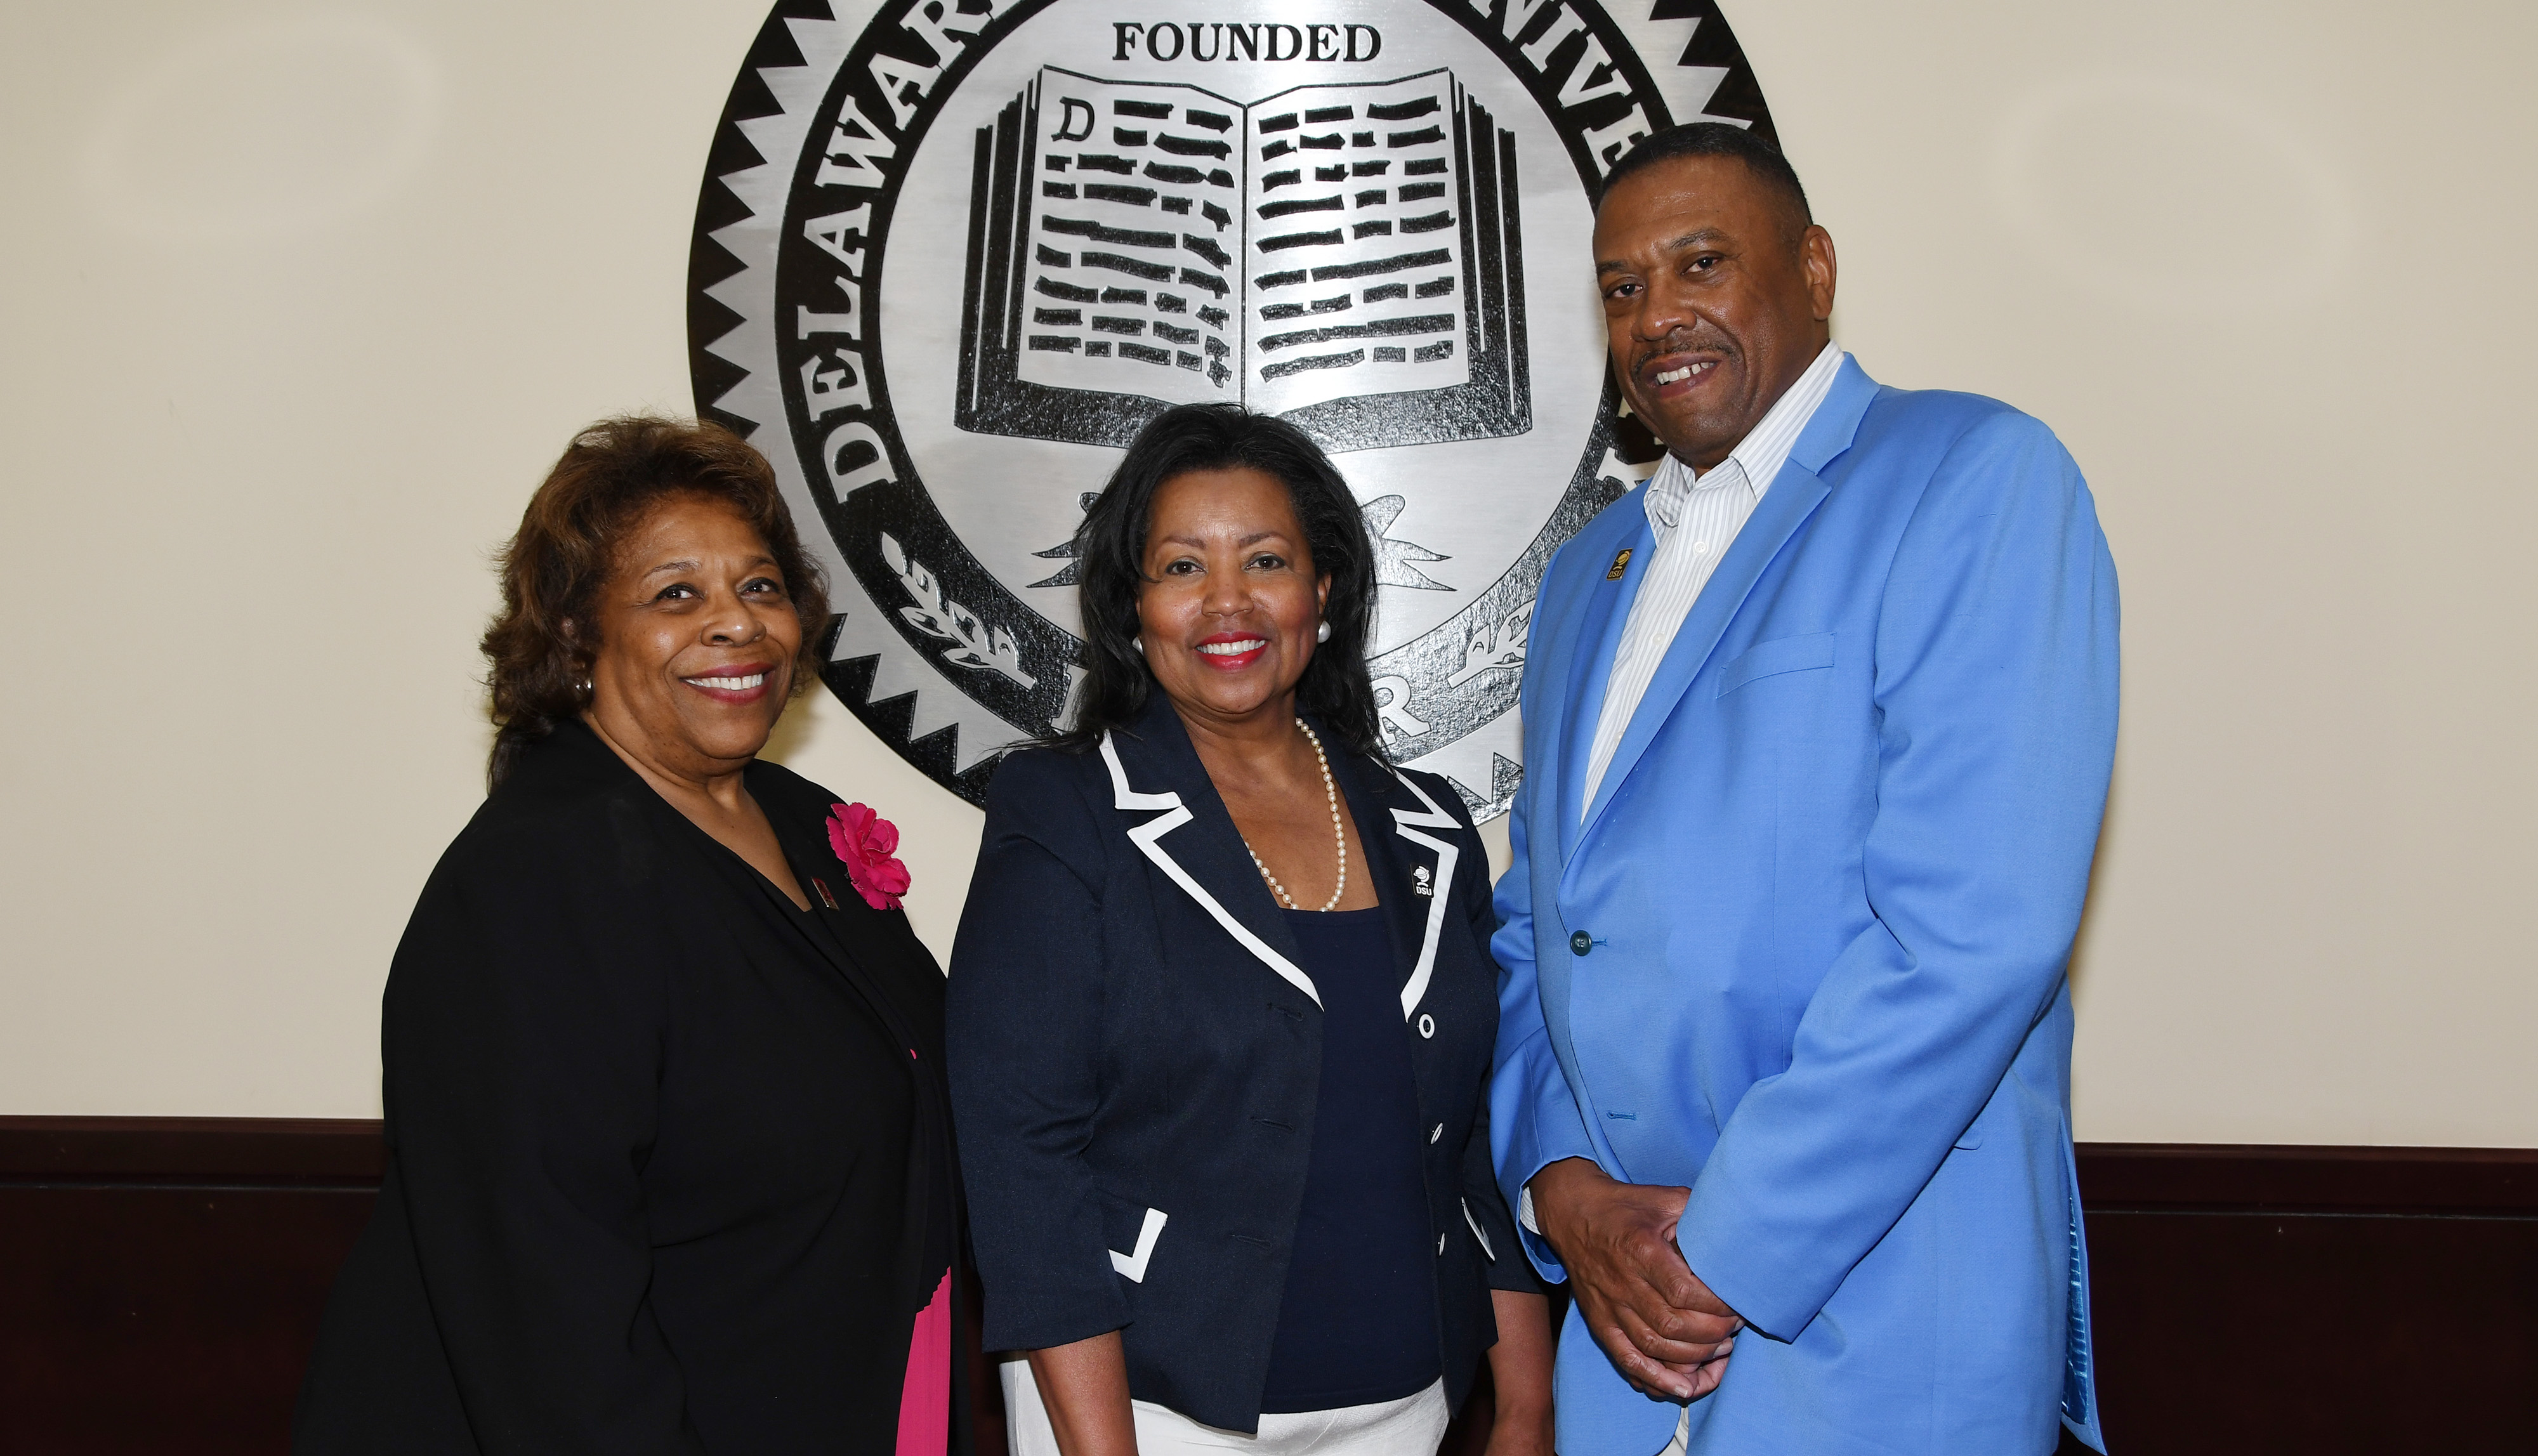 The Board of Trustees voted on June 15 to select Dr. Wilma Mishoe as the 11th permanent president in DSU history. Also elected that day were Board Chair Dr. Devona Williams and Board Vice Chair John Ridgeway.